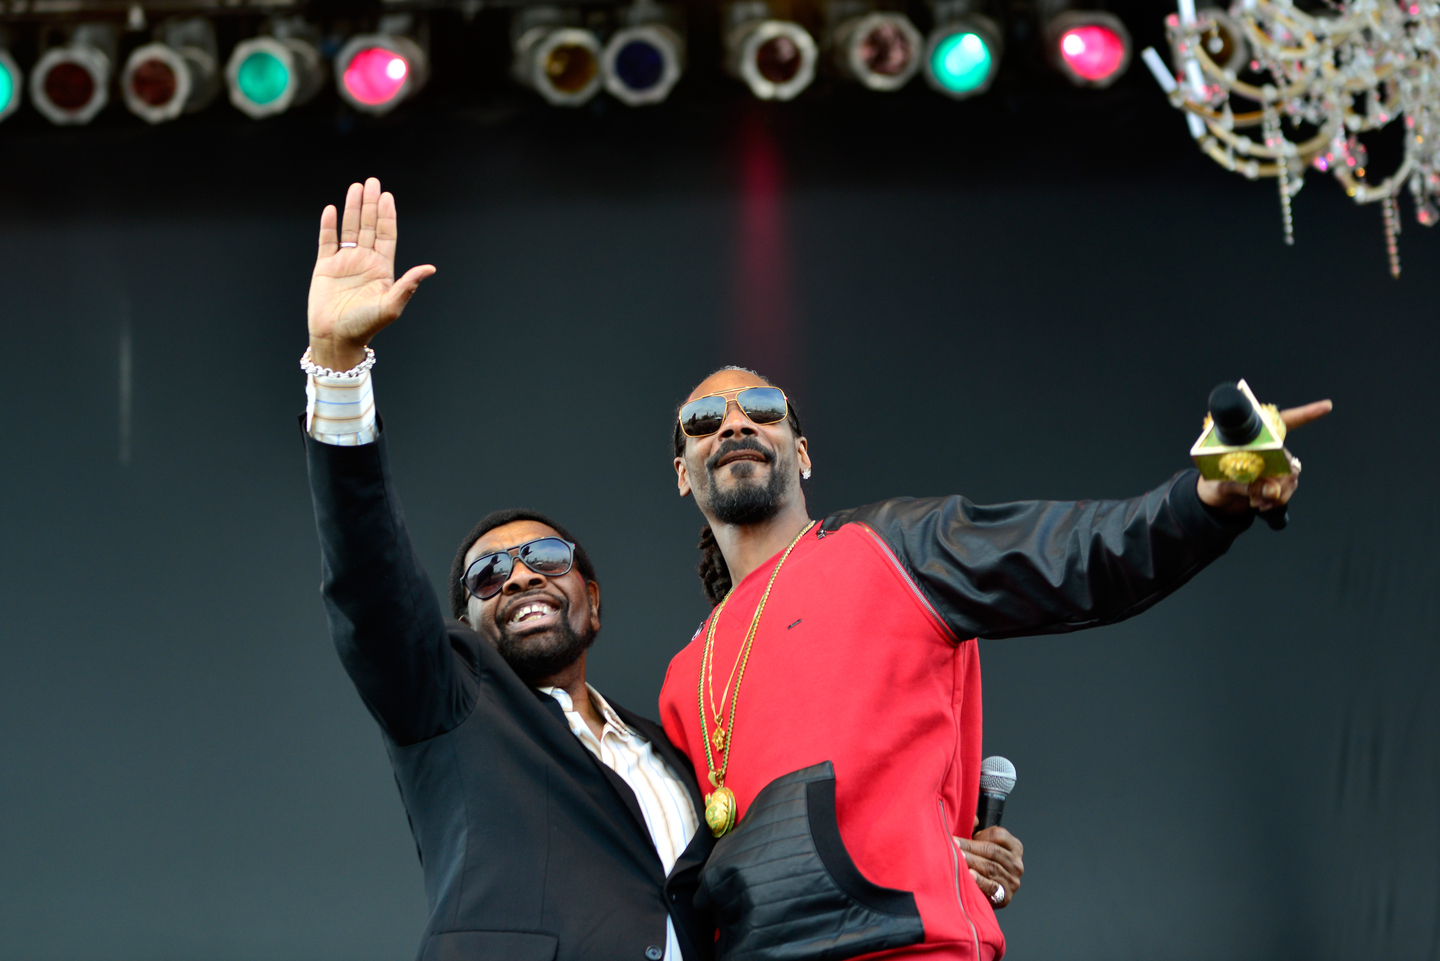 William Bell and Snoop Dogg, 2014. Photo by Jordan Naylor/Getty Images for SXSW